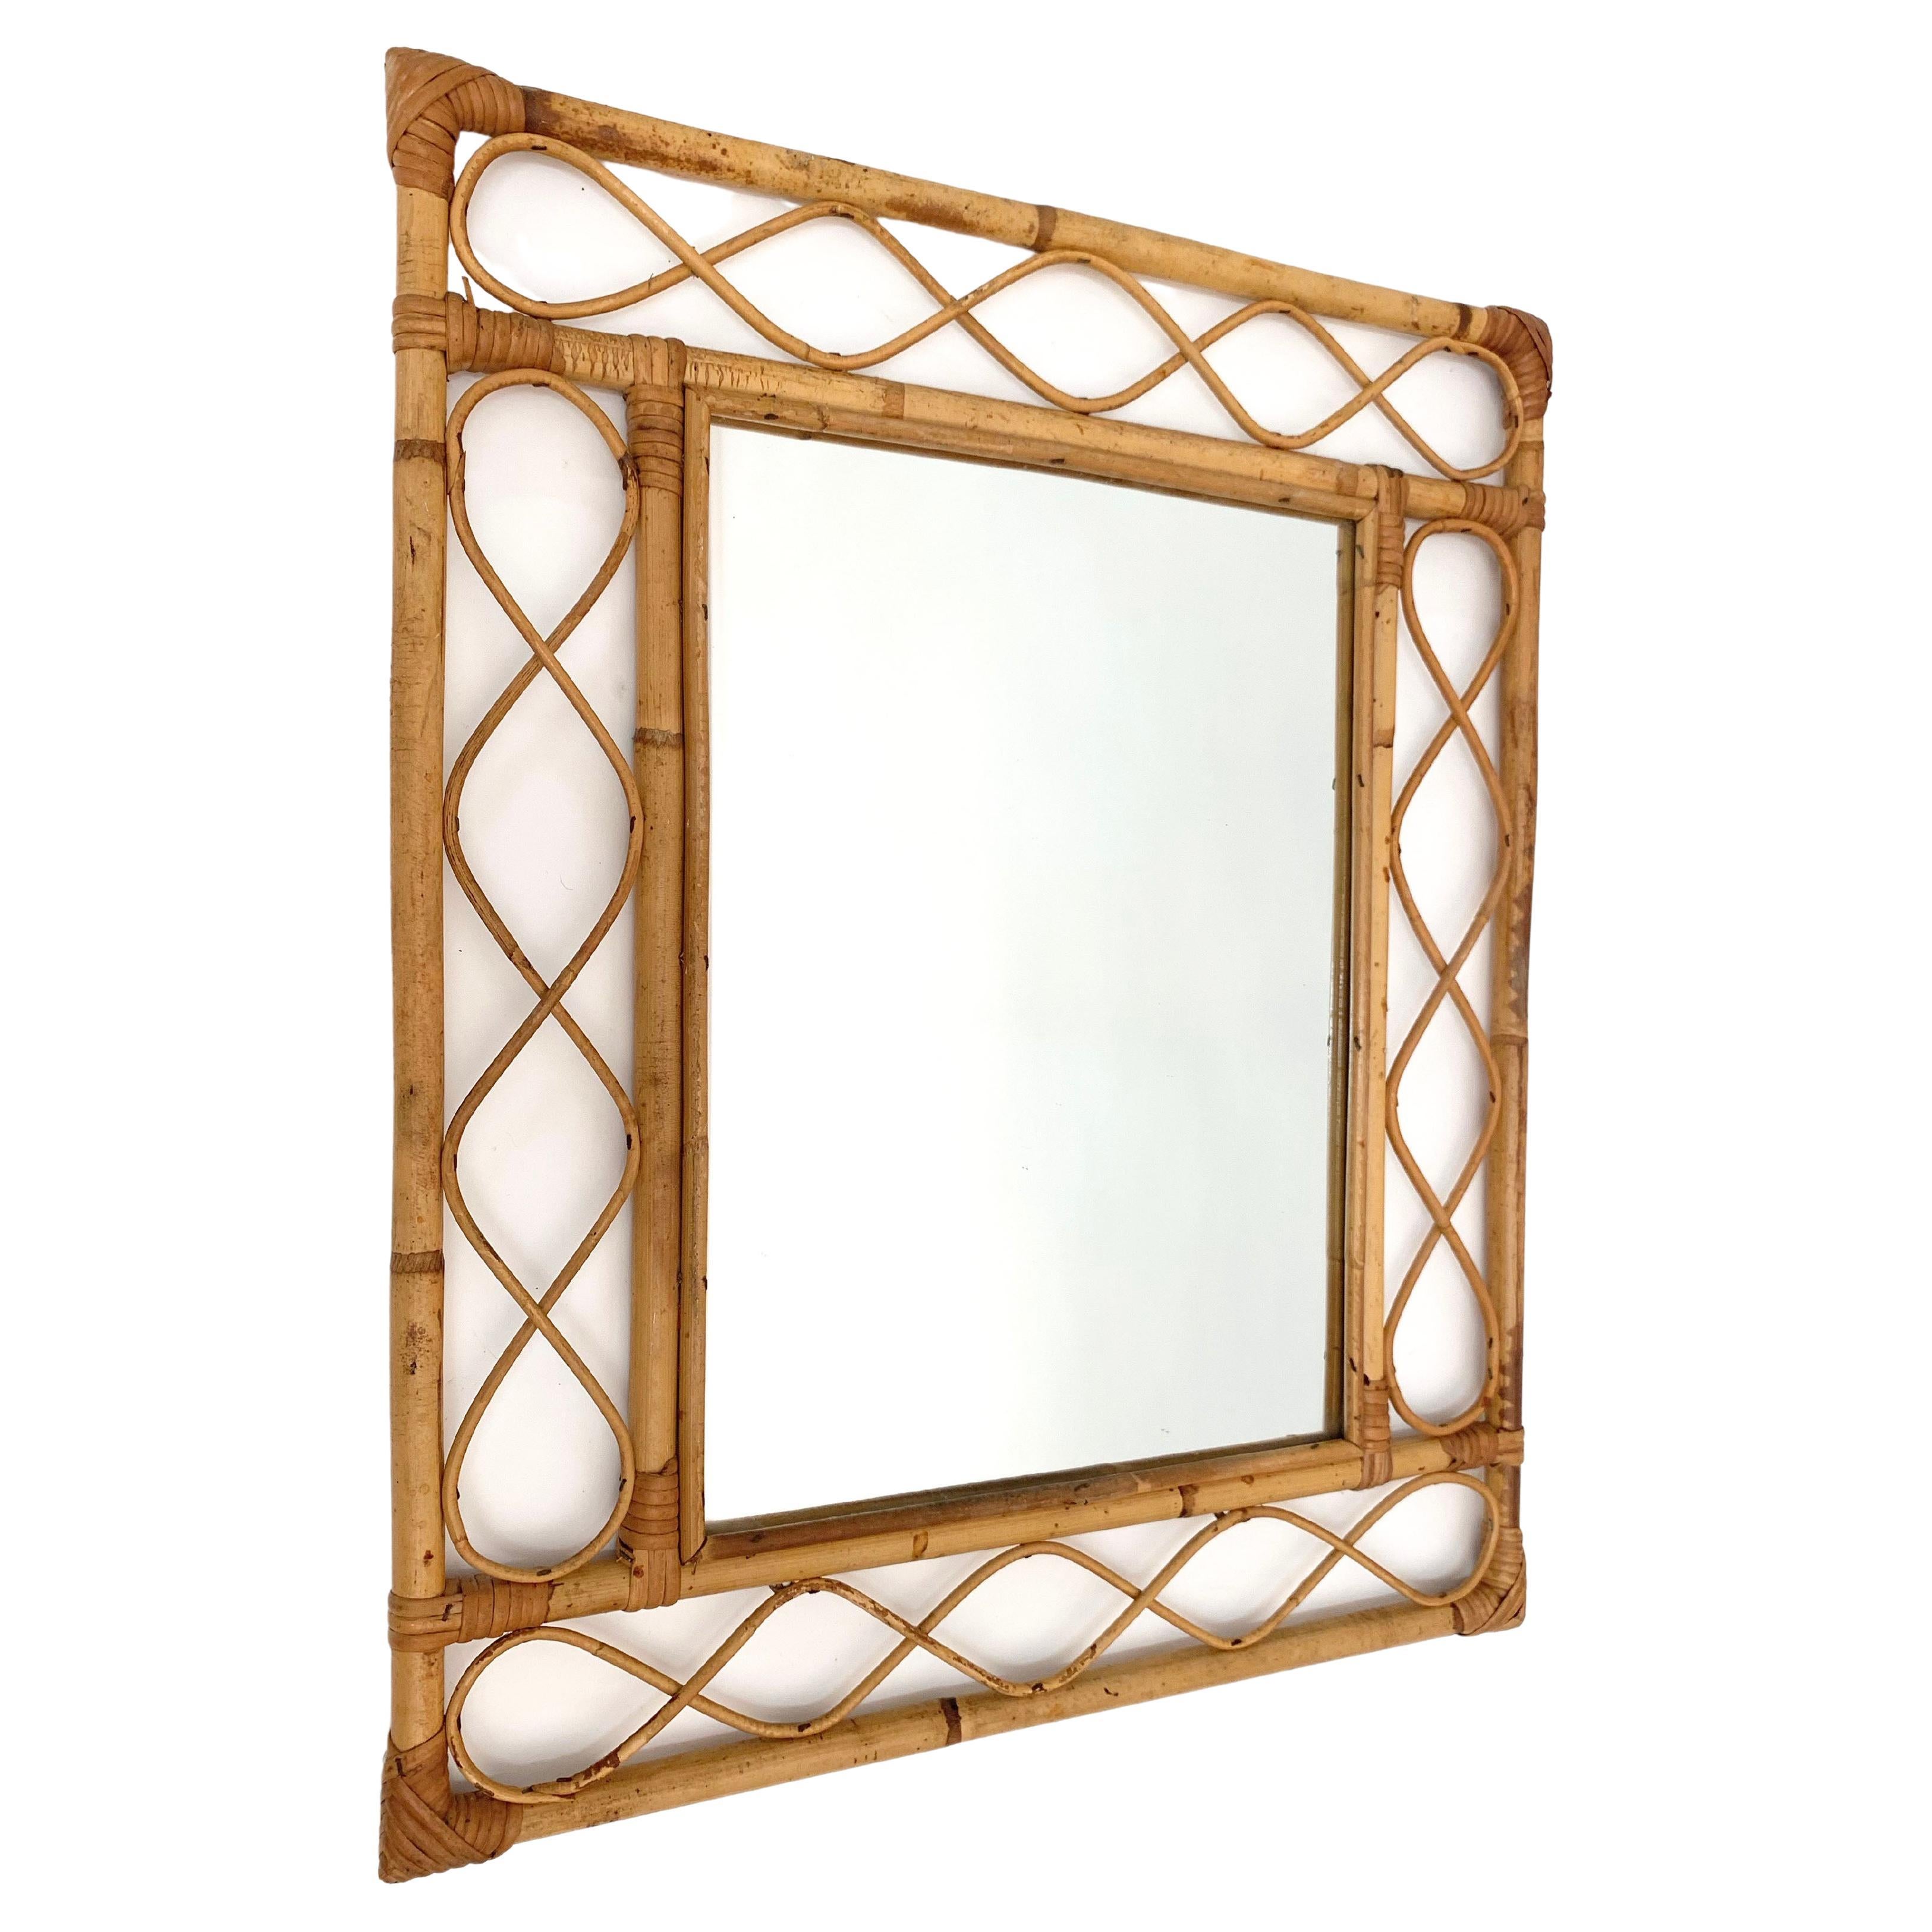 Marvellous Côte d'Azur wall mirror in bamboo and rattan. This item was produced in France during the central part of the 1960s.

The mirror its original and good vintage conditions, and the use of the materials and the lines, the straight bamboo